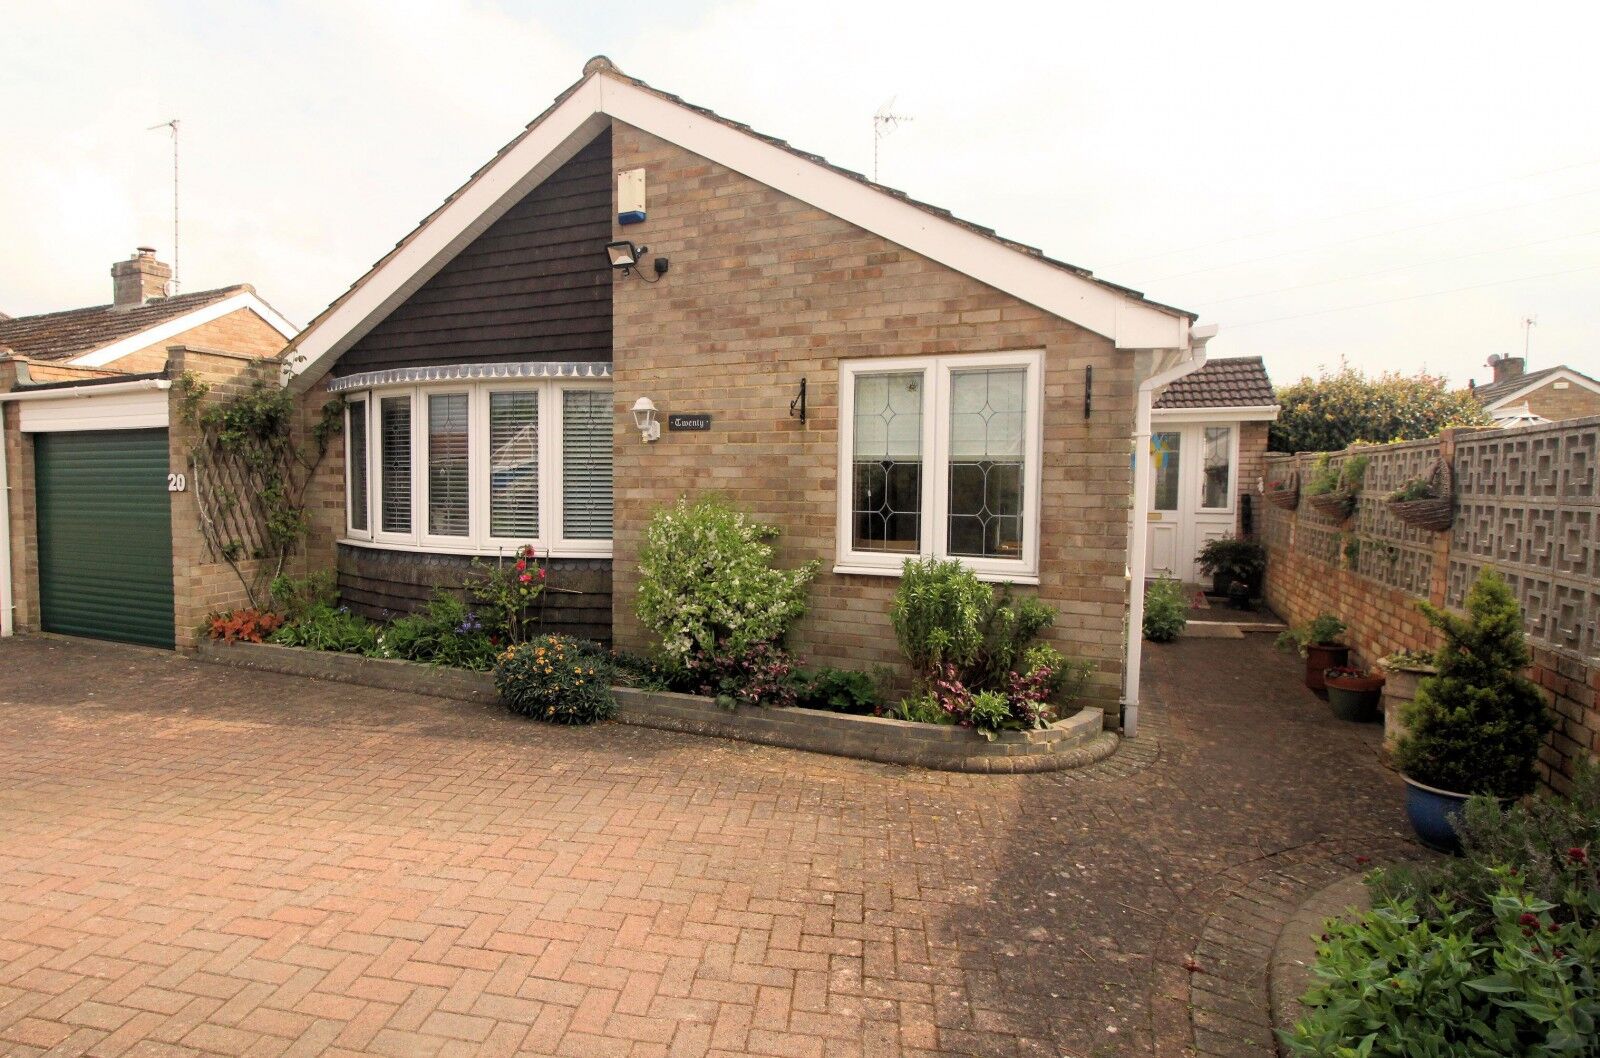 3 bedroom detached bungalow for sale Birch Close, Sonning Common, RG4, main image